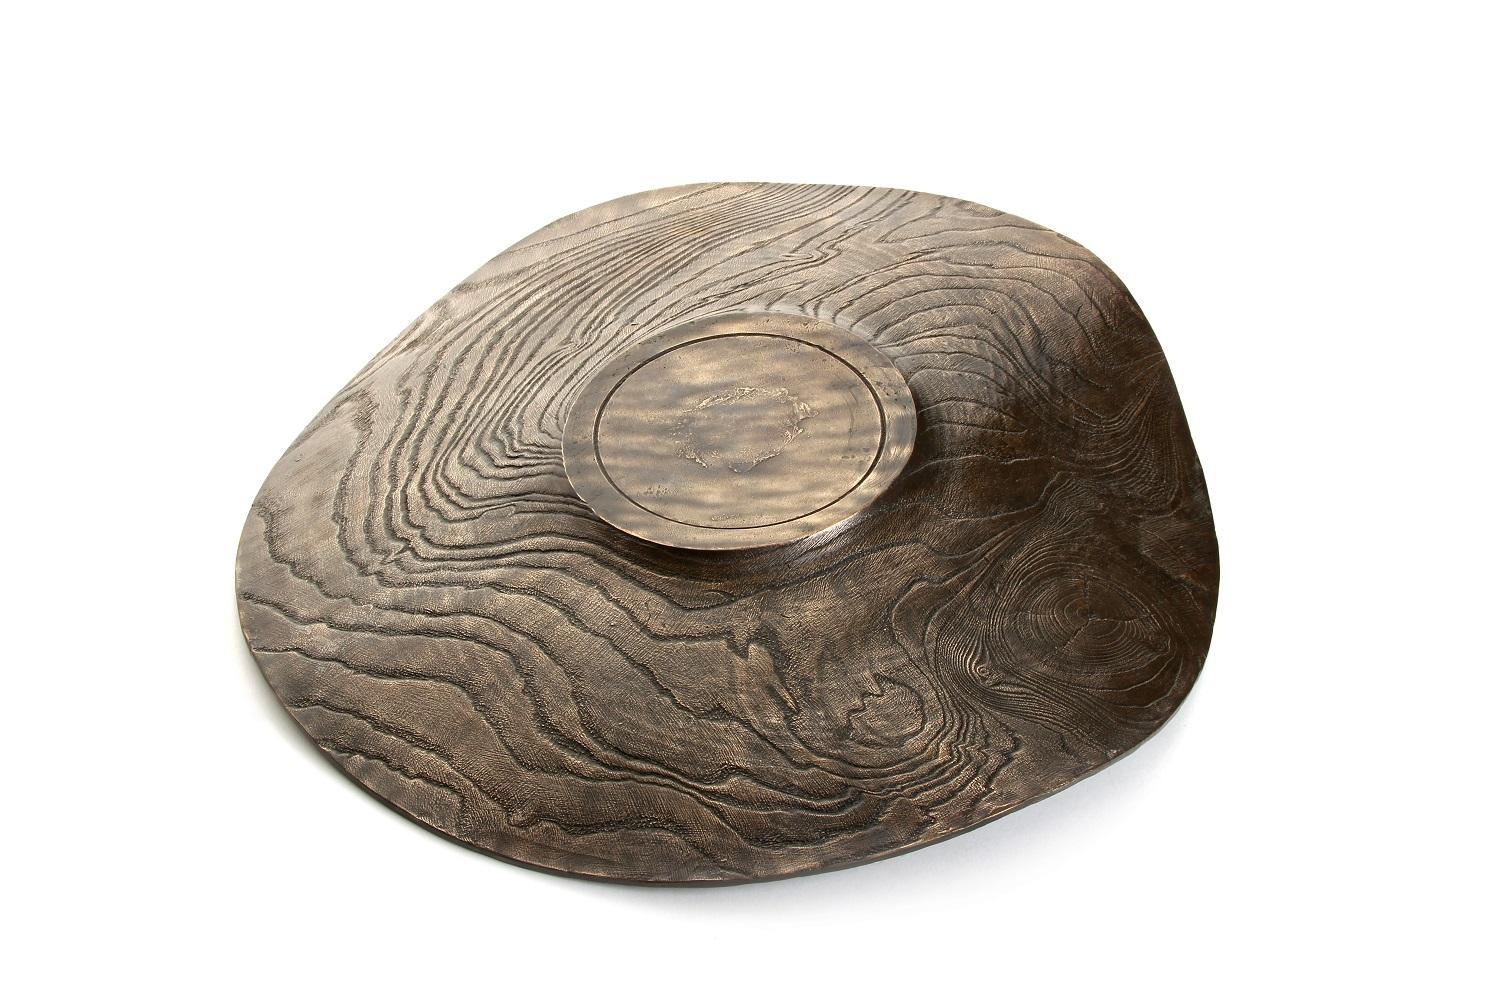 American Solid Bronze ‘Willow Platter’ or Dish with Wood Texture and Blackened Patina For Sale